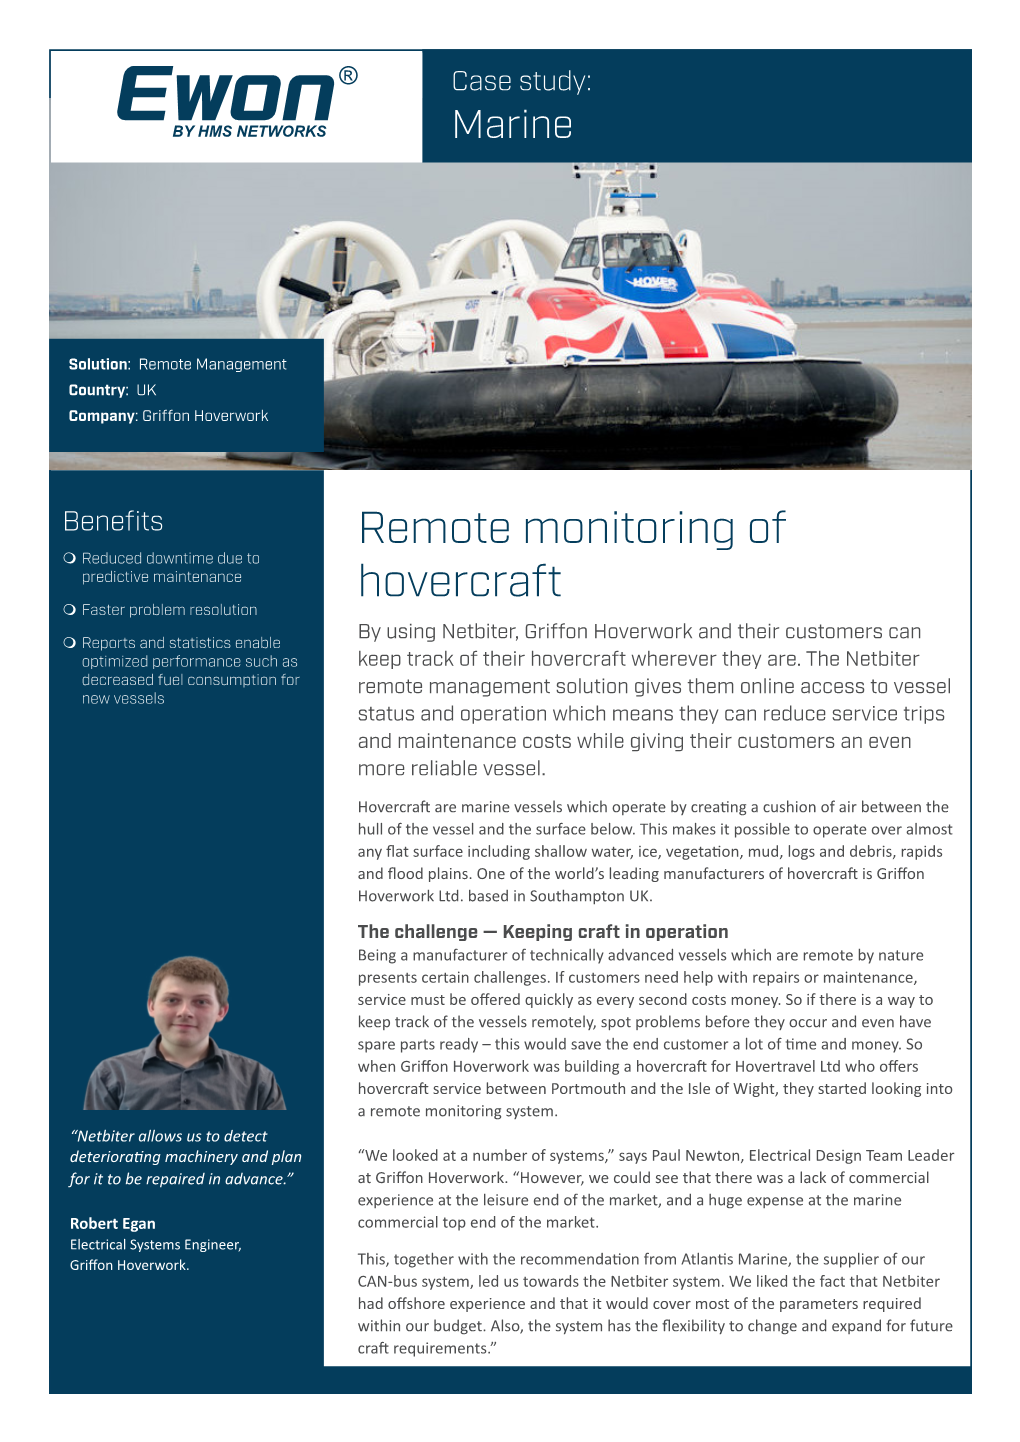 Remote Monitoring of Hovercraft